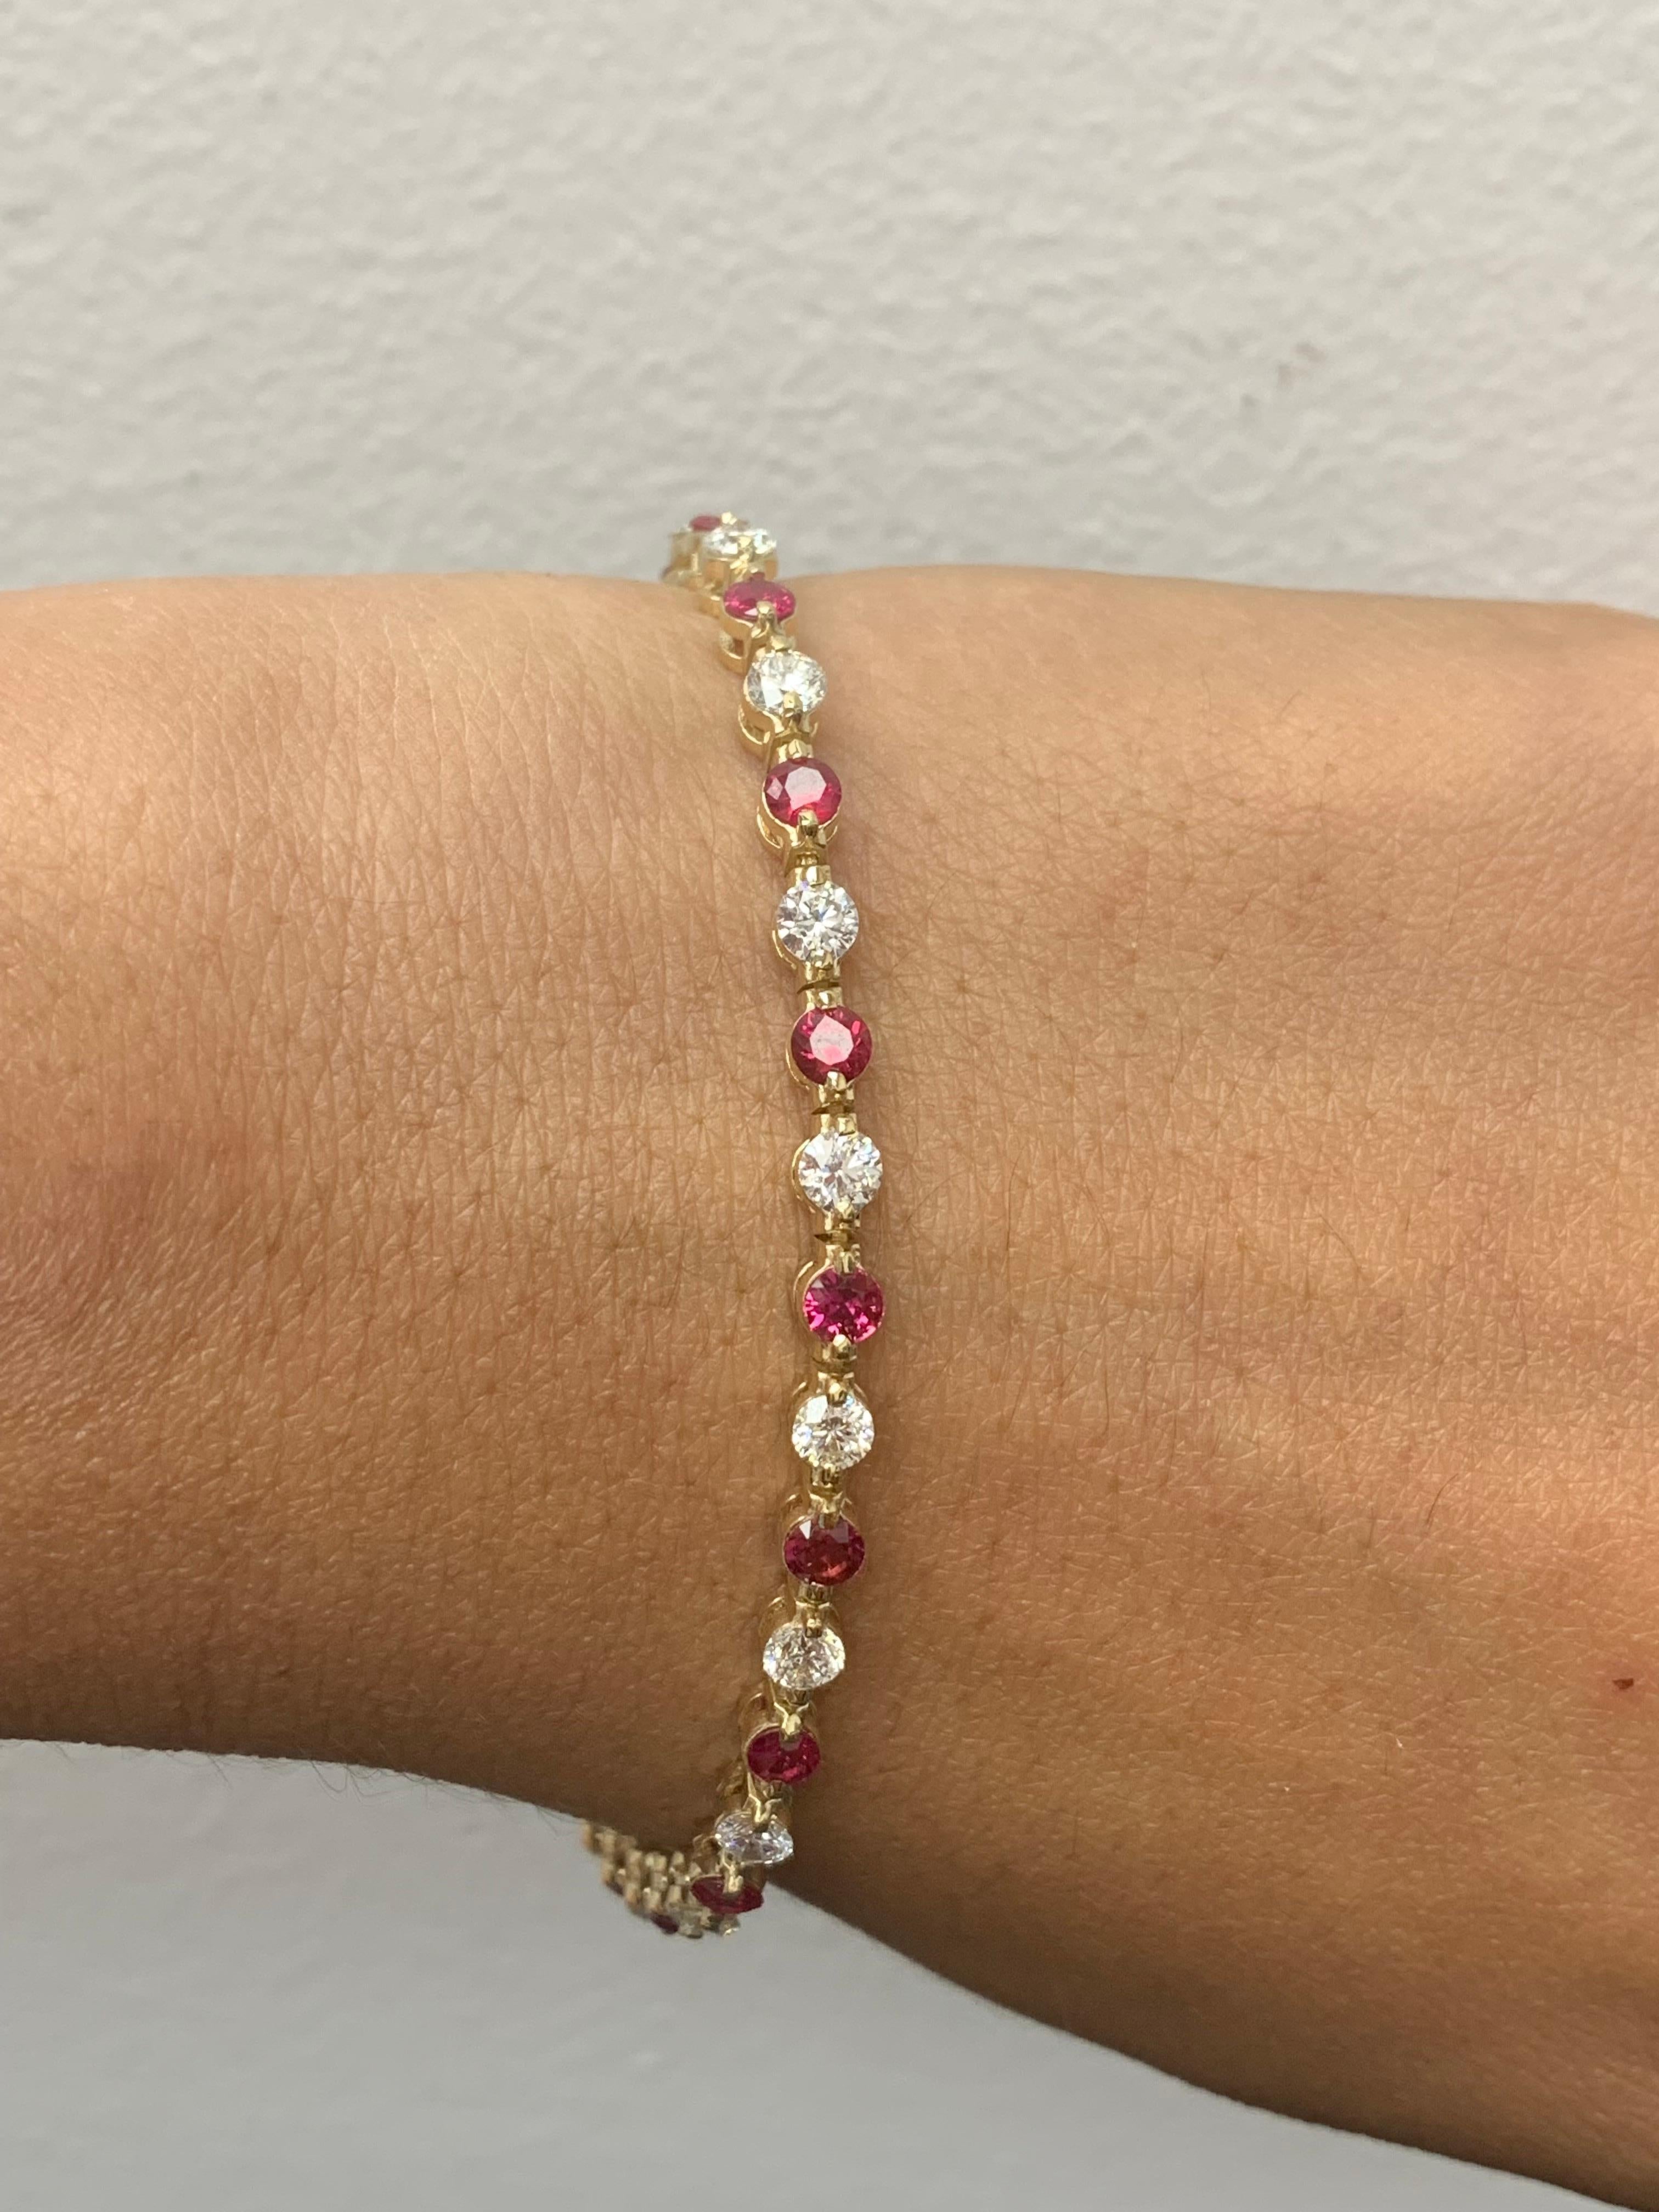 A stunning bracelet set with 18 stunning Red Rubies weighing 3.10 carat total. Alternating these Rubies are 18 sparkling round diamonds weighing 2.50 carats in total. Set in polished 14k yellow gold. Double lock mechanism for maximum security. A